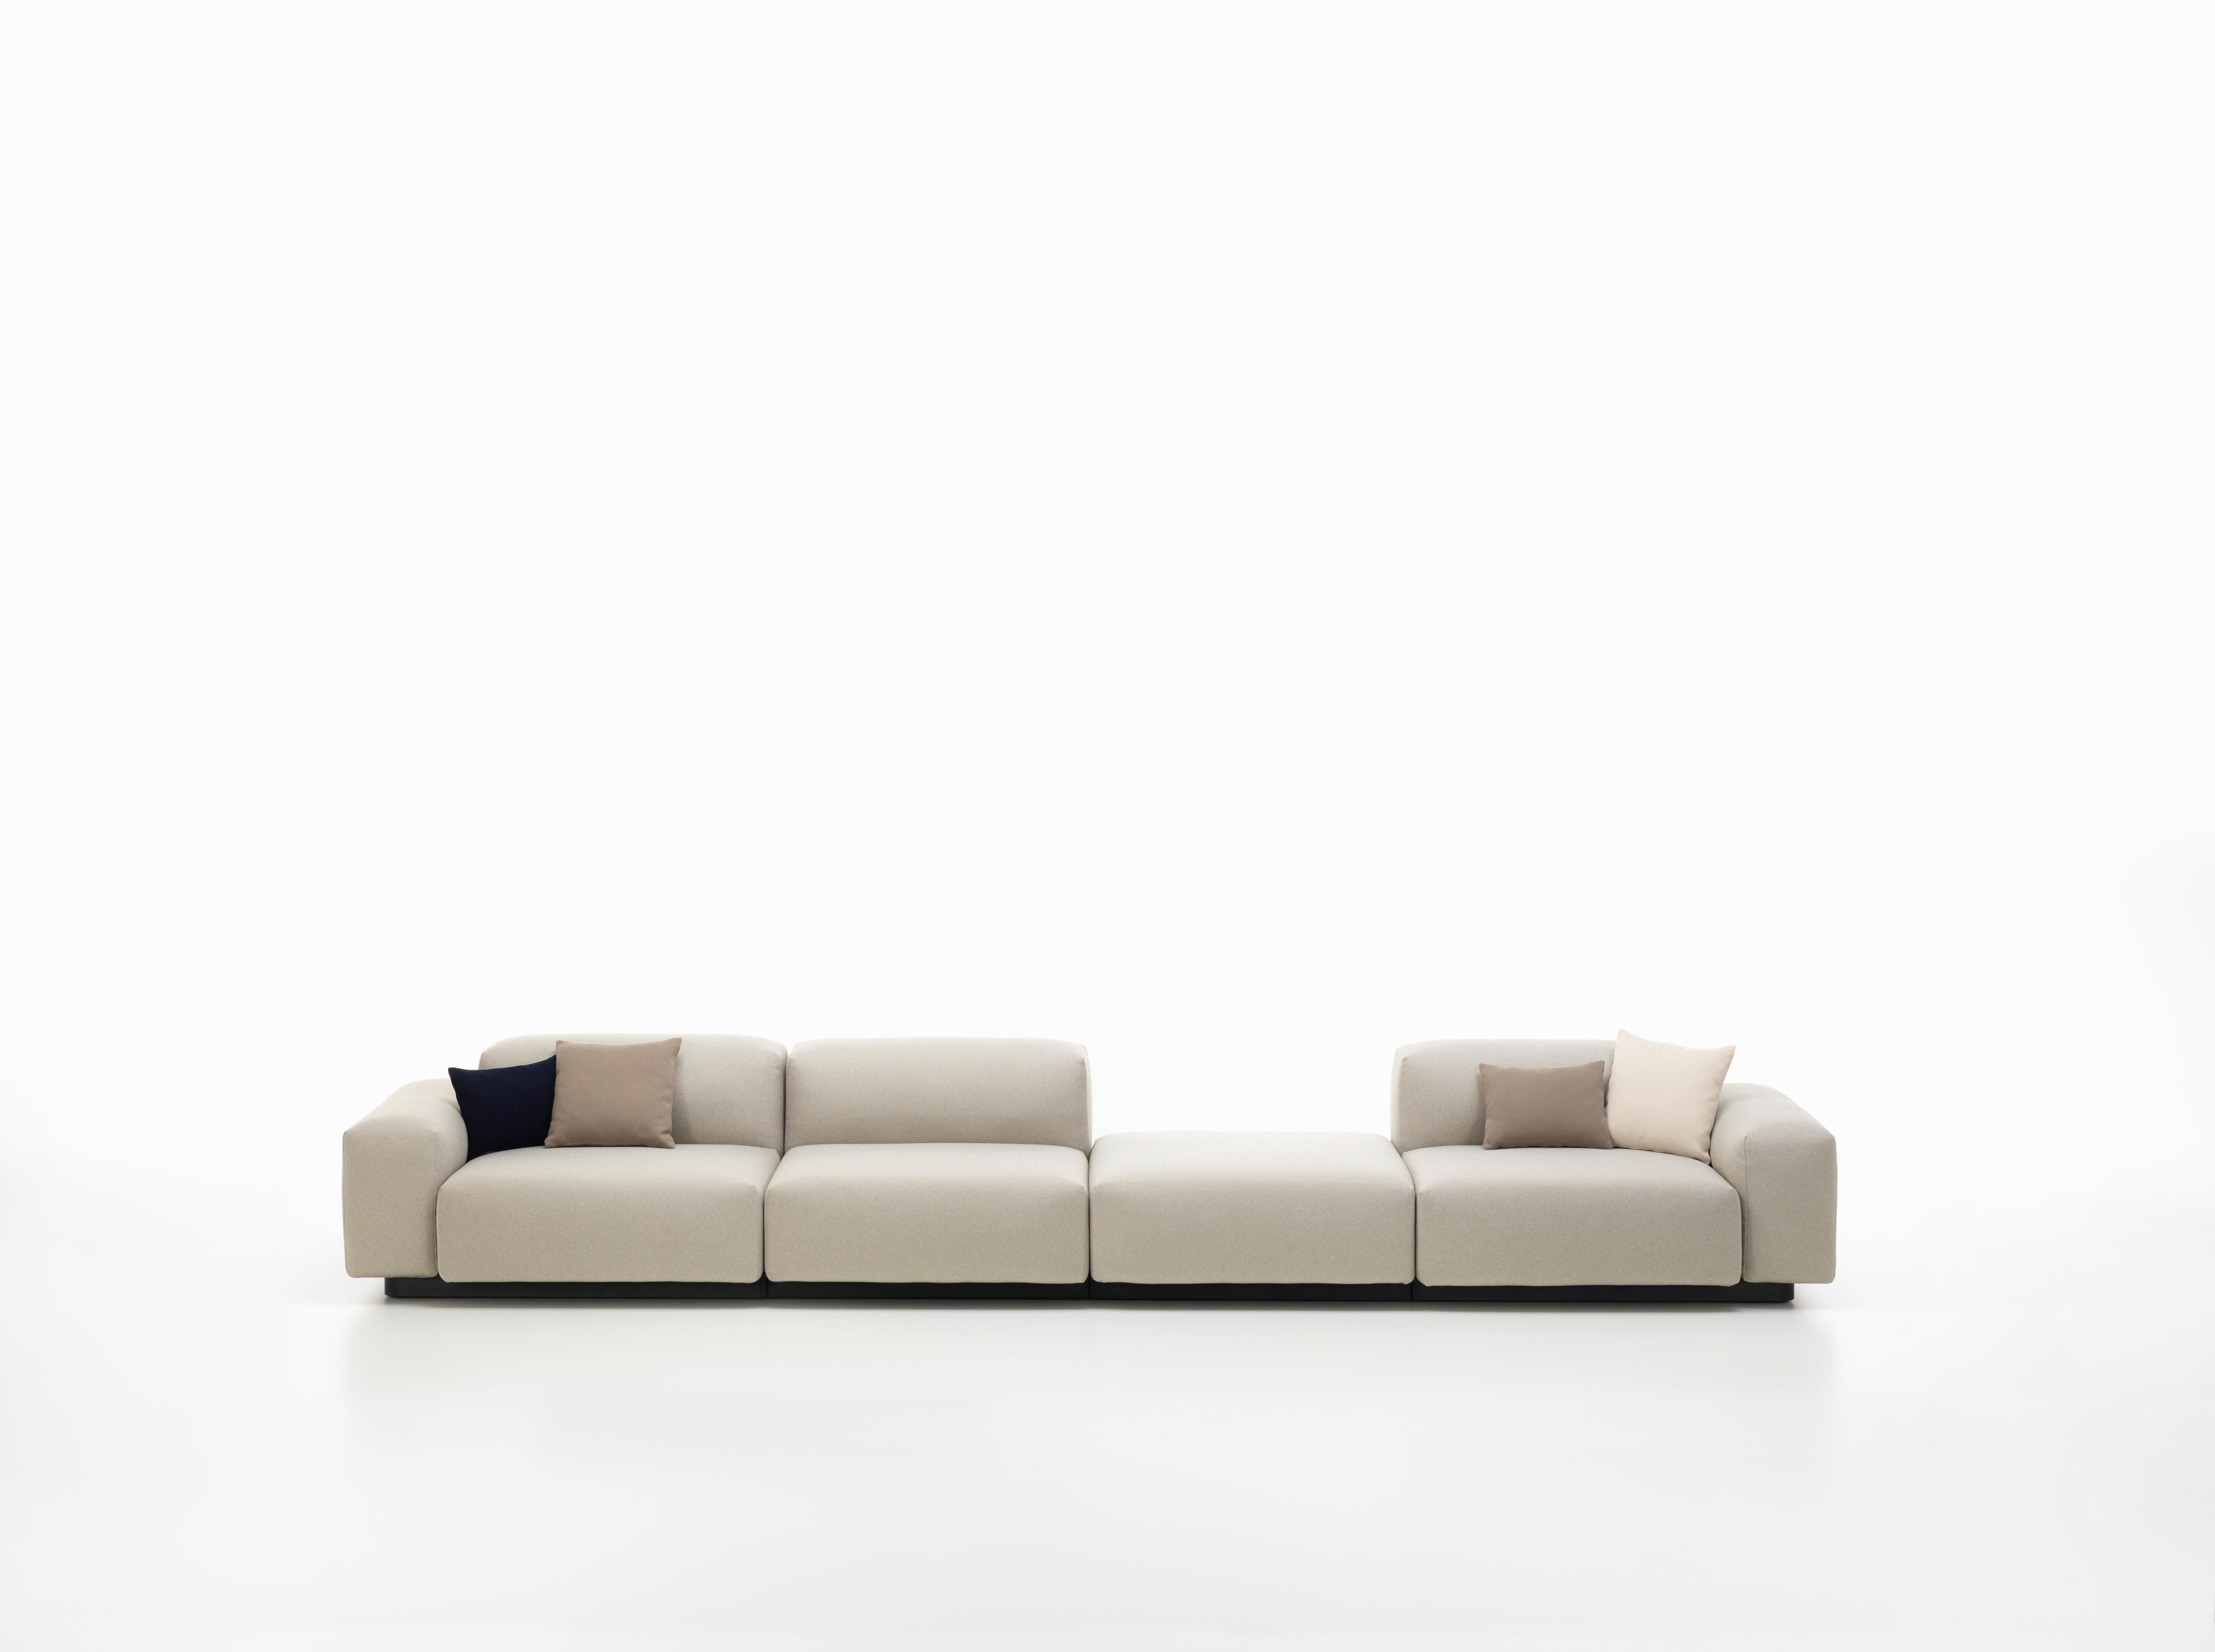 These items are only available in the United States.

The soft modular sofa is Jasper Morrison‘s updated interpretation of what has become a modern classic: the low-slung modular sofa with a decidedly horizontal emphasis. Uniting carefully